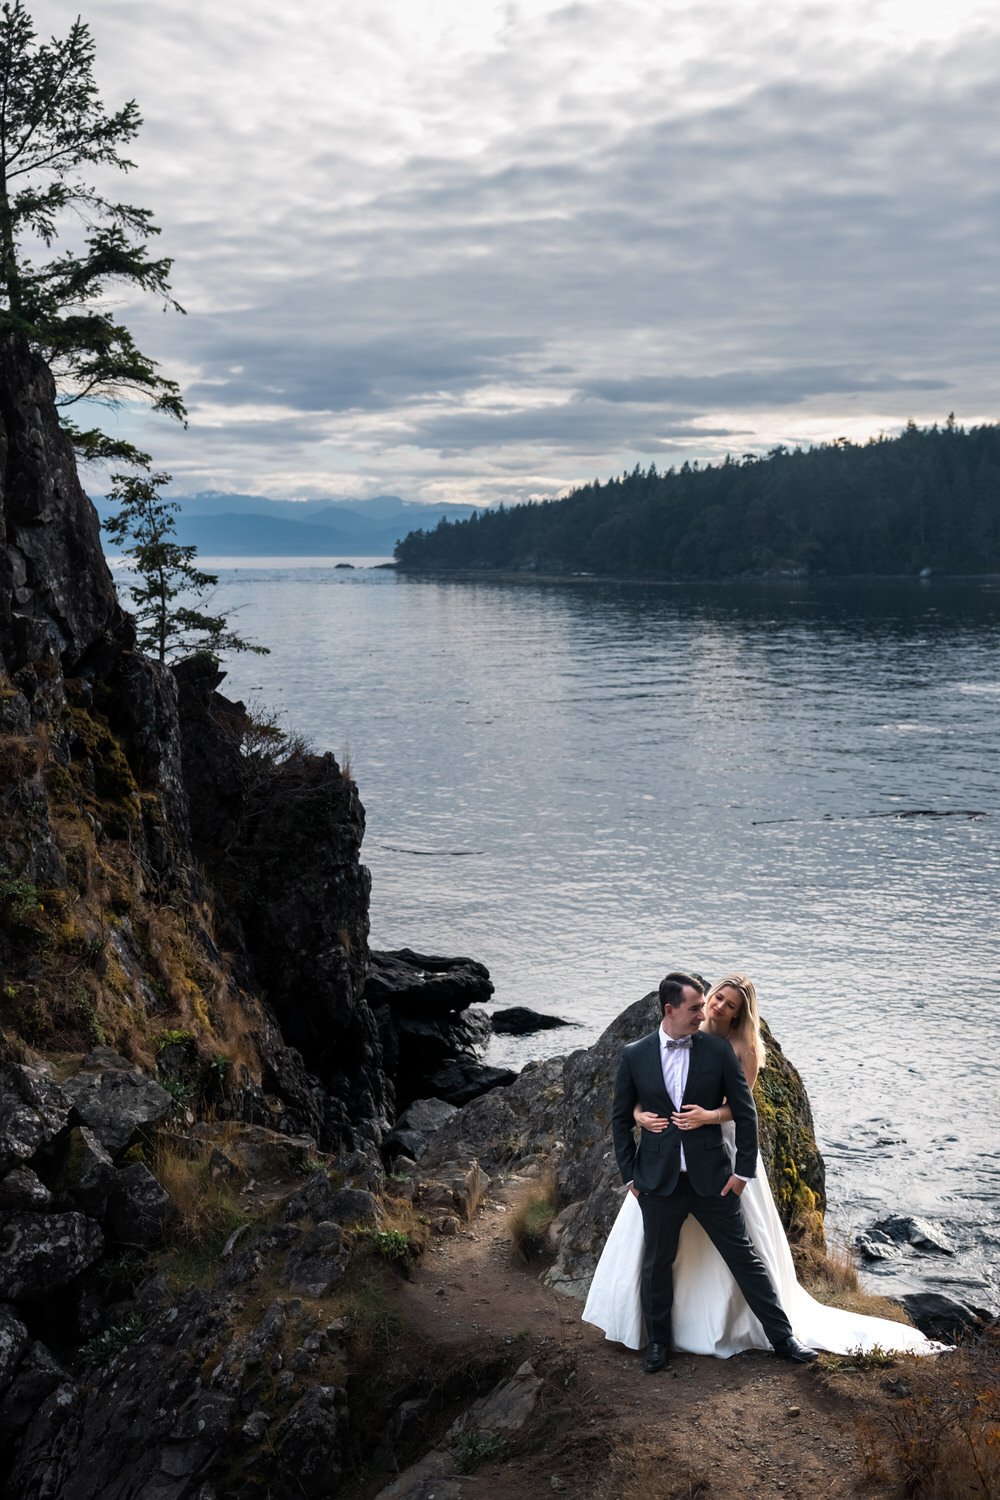 Vancouver Island Adventure Elopement and Small Wedding Photographer - Allie Knull's Photography-19.jpg